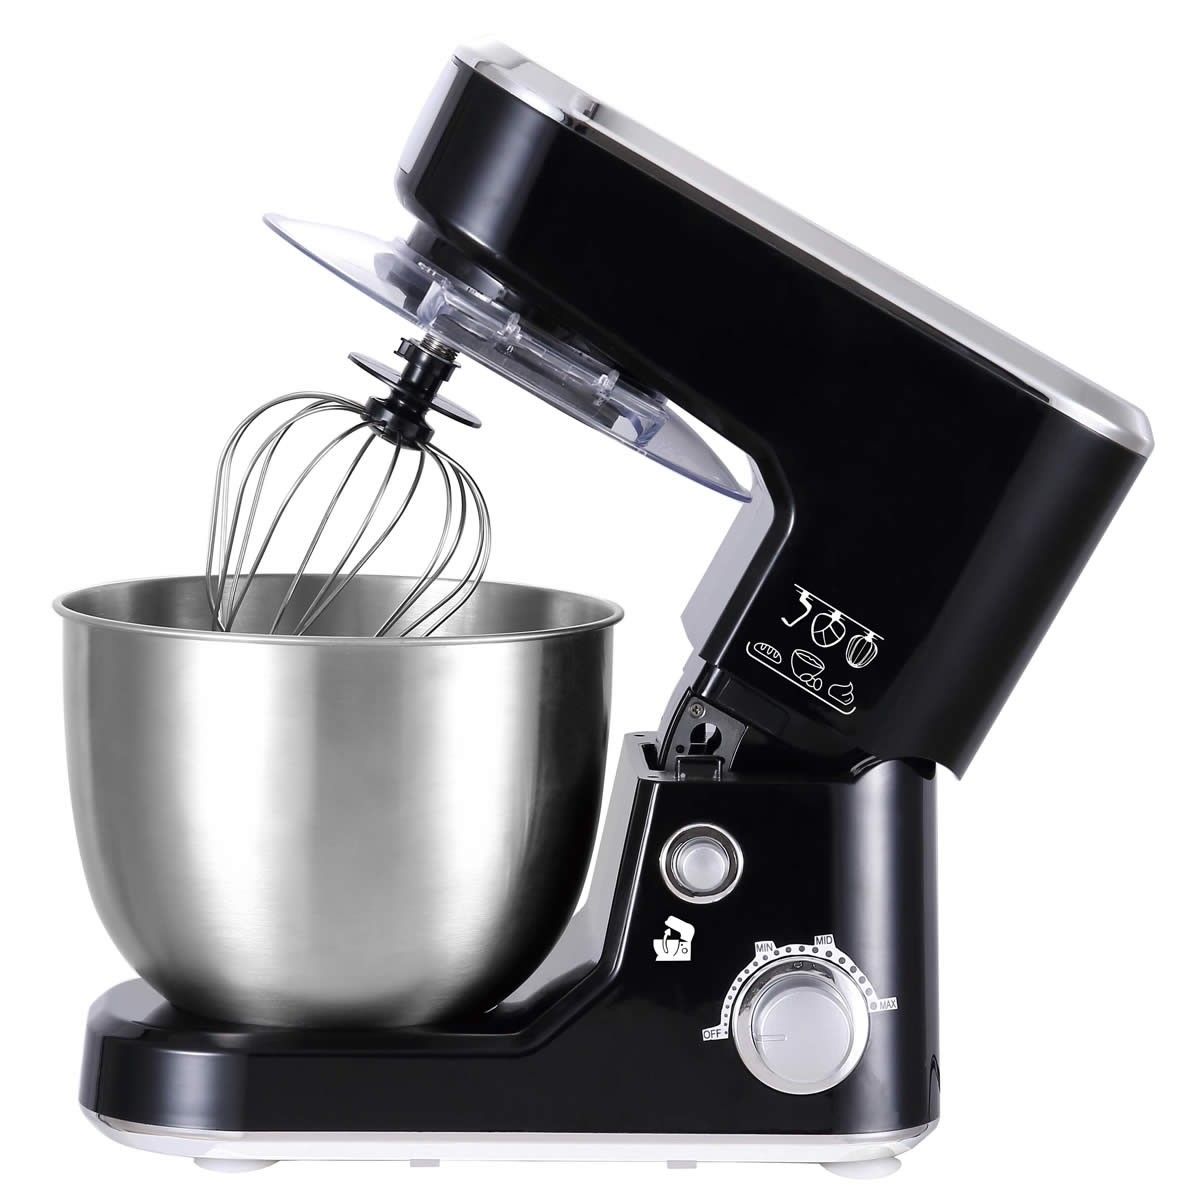 Healthy Choice 1000W Electric Bench Top 5L Kneading Mixer Bowl